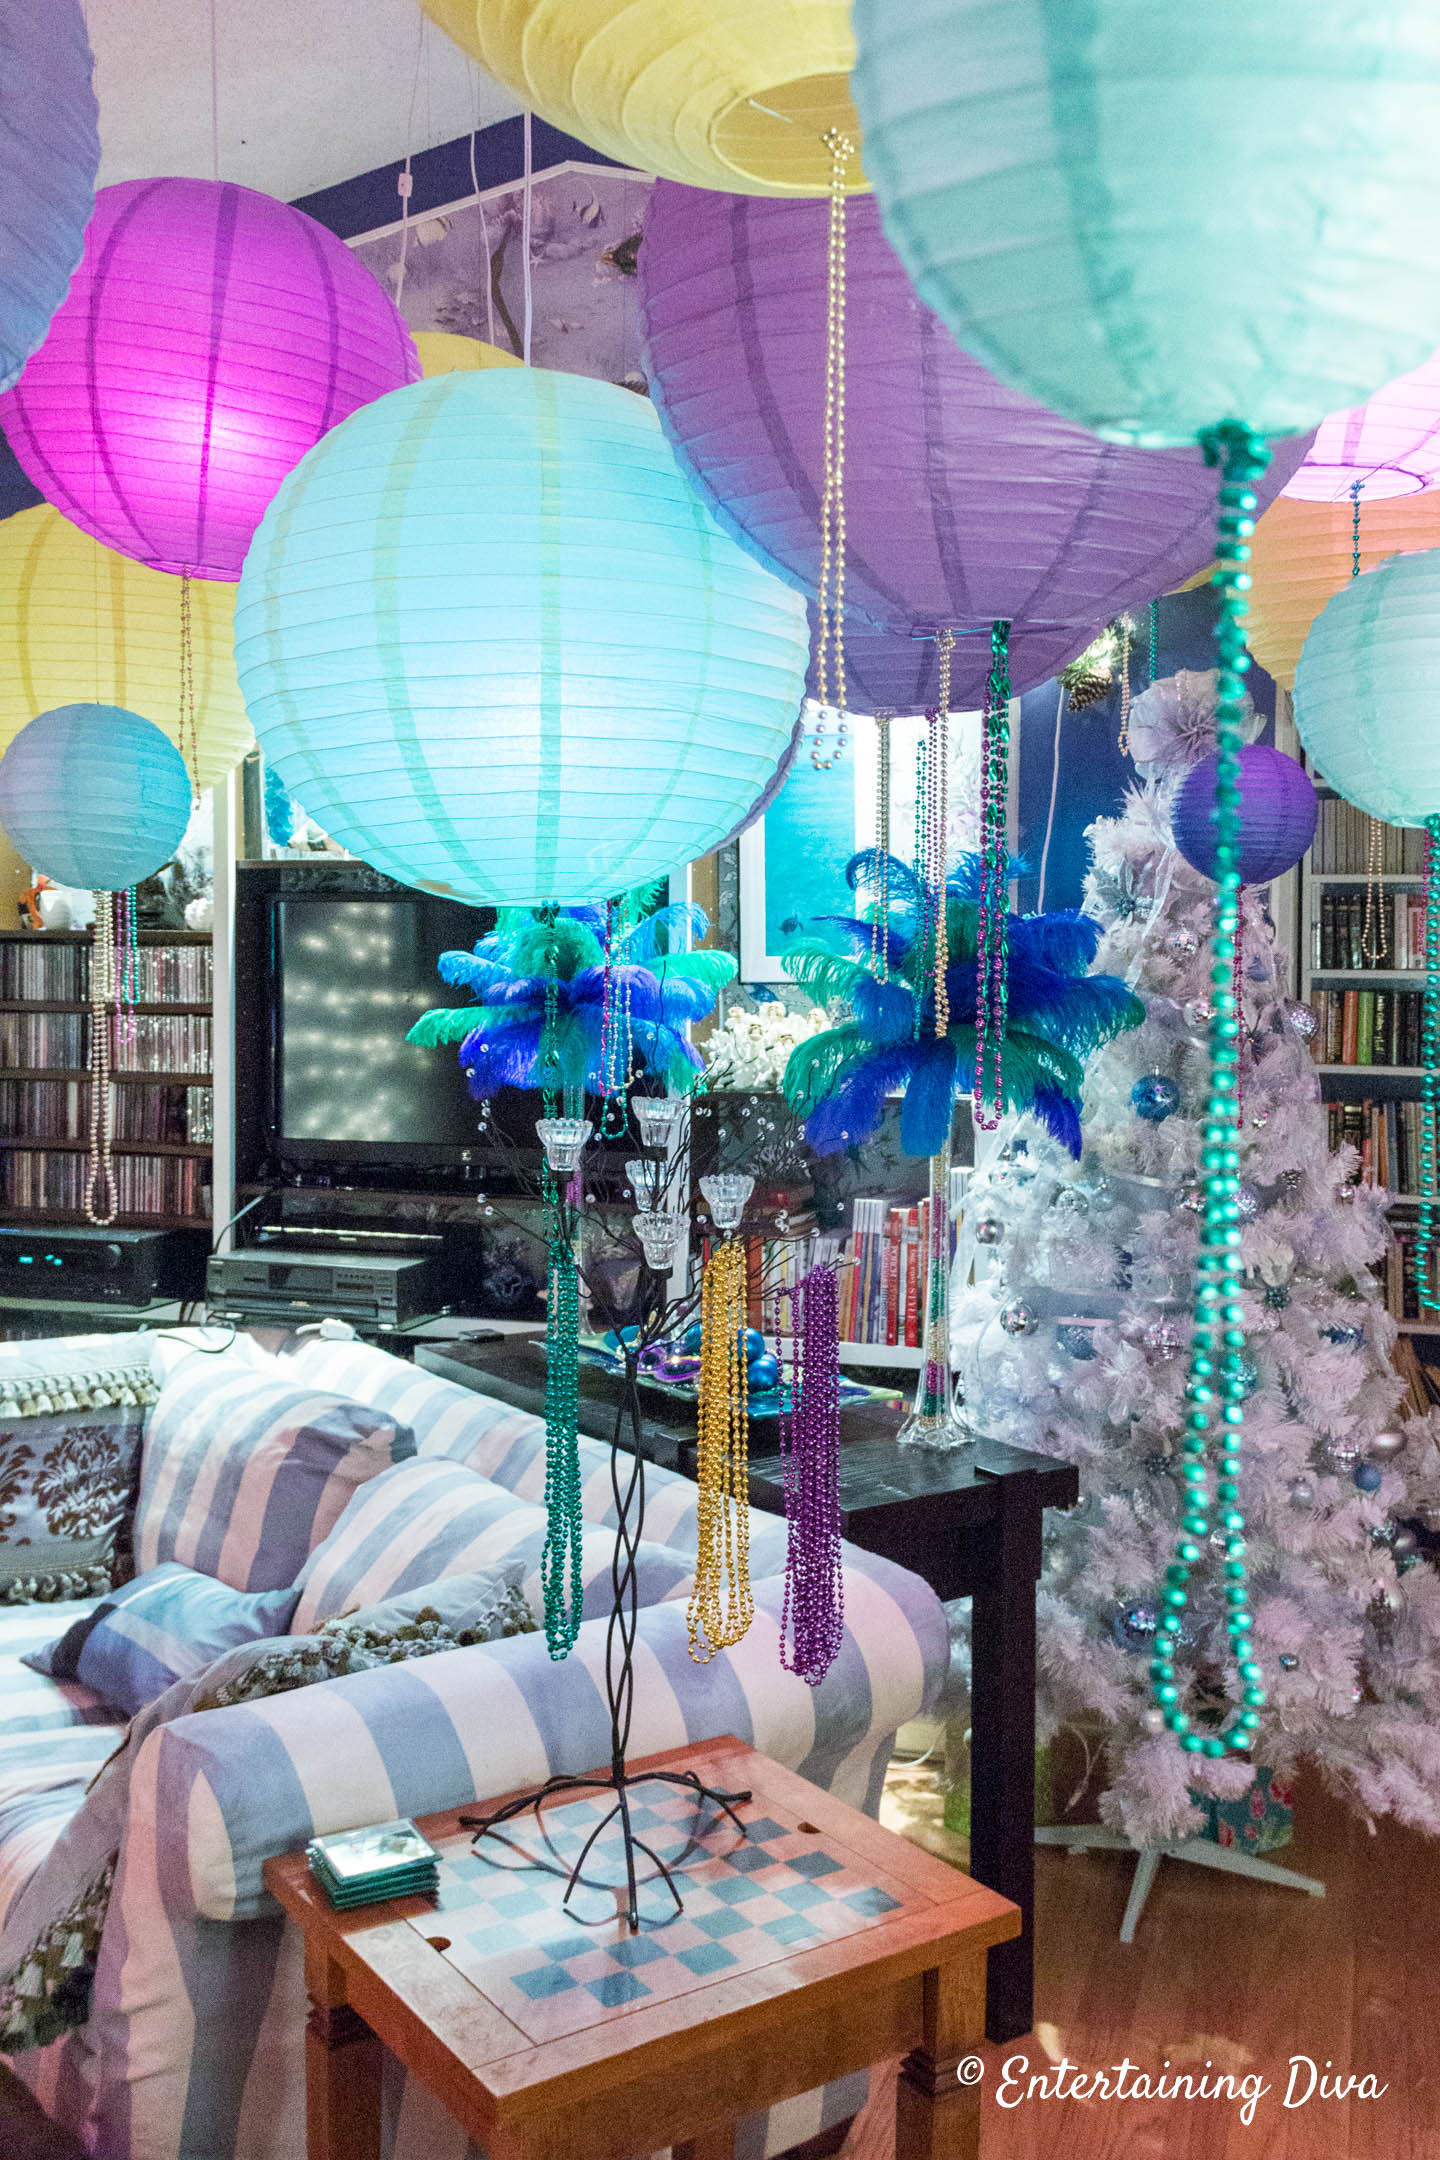 Mardi Gras party decorations with paper lanterns and beads